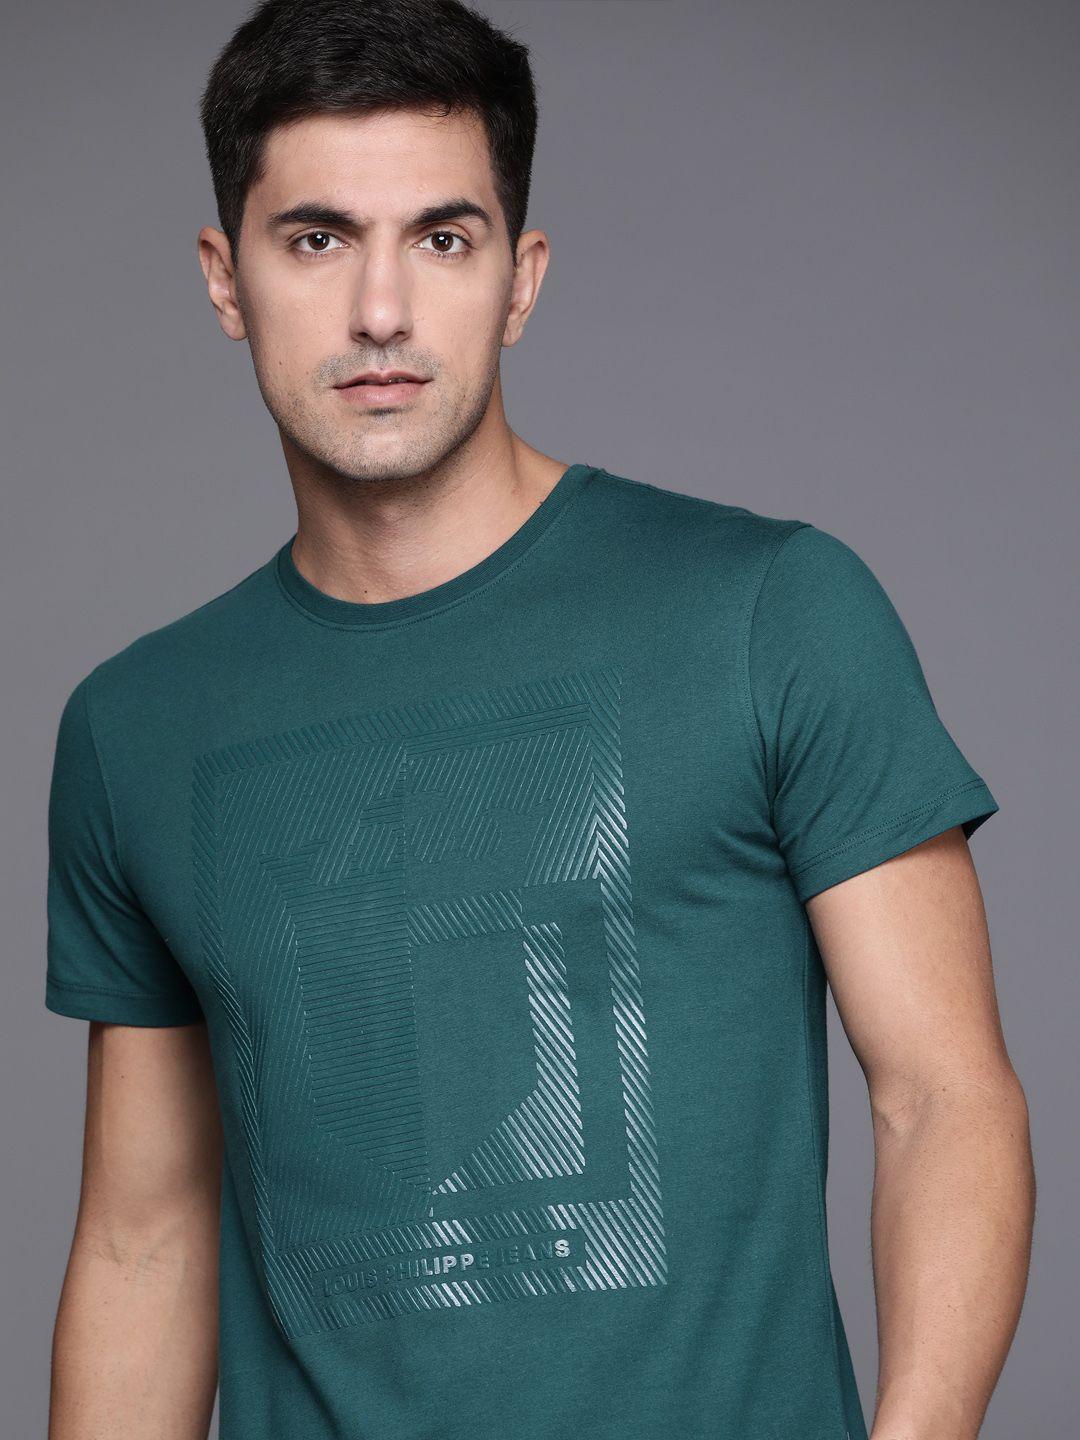 louis philippe jeans men teal green cotton striped embossment t-shirt